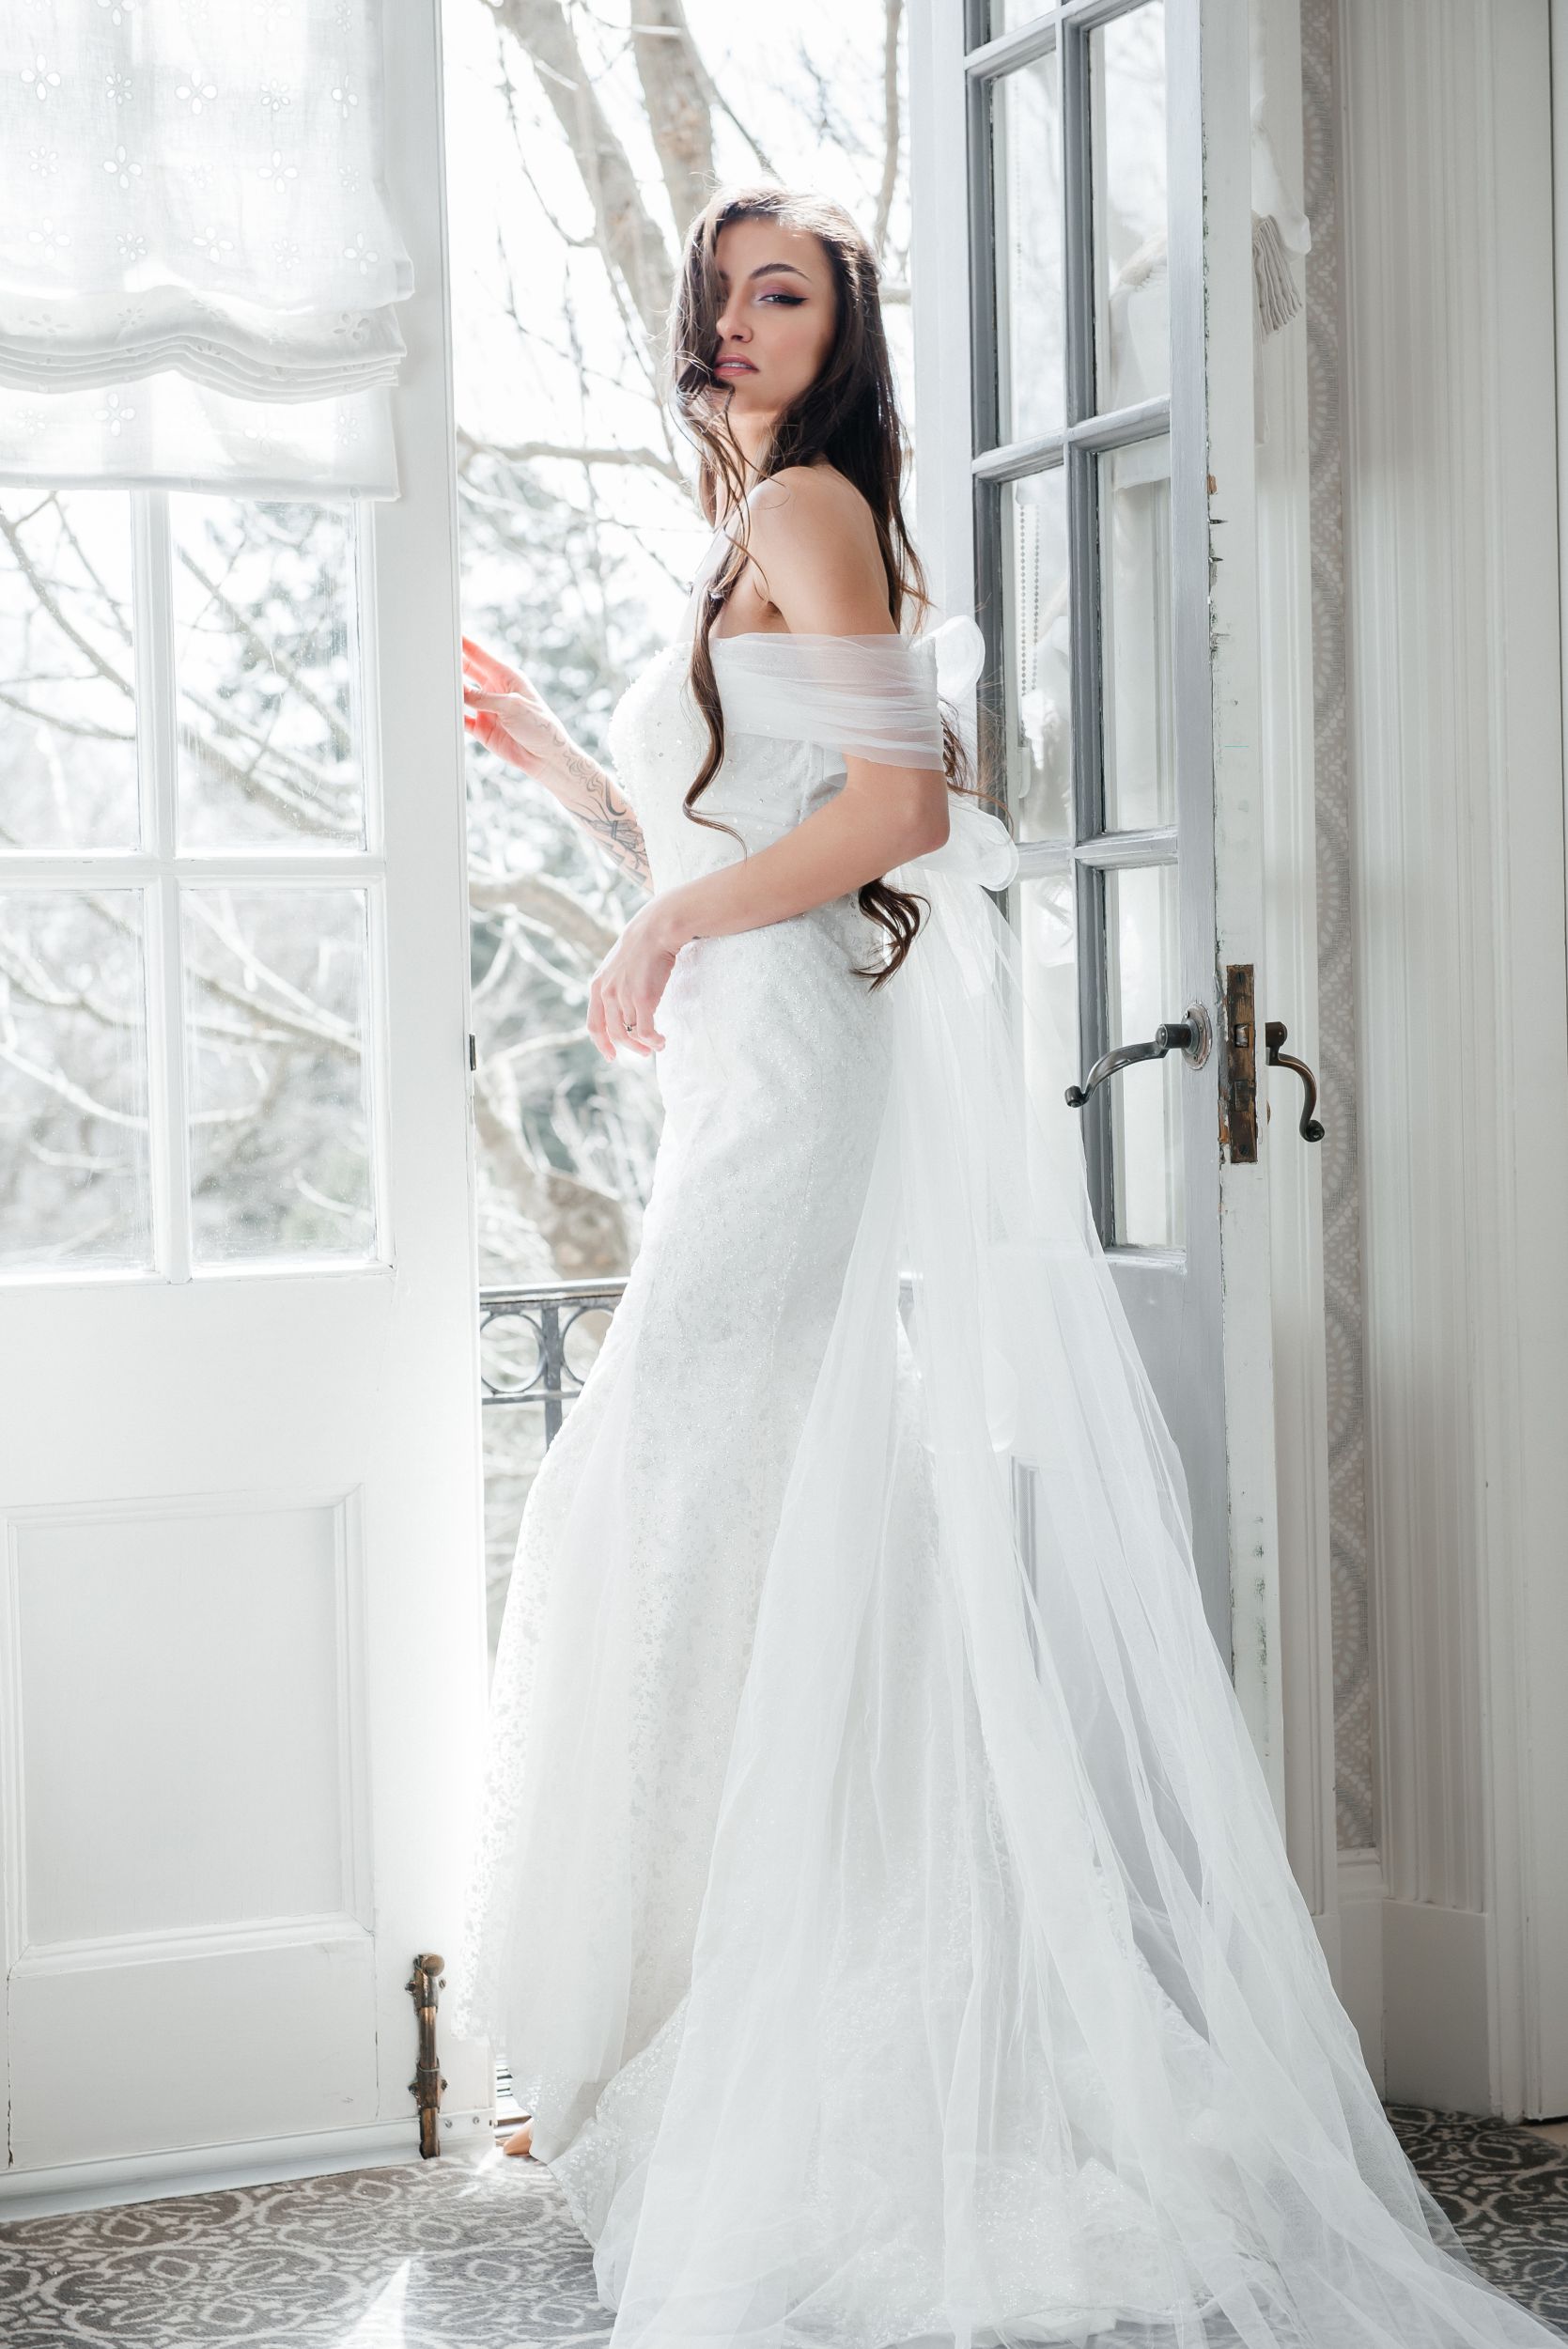 Feel like a star on your special day with the Star of Bethlehem wedding gown for rent in Toronto. This mermaid-style gown features a stunning silver tone, perfect for any luxurious wedding.